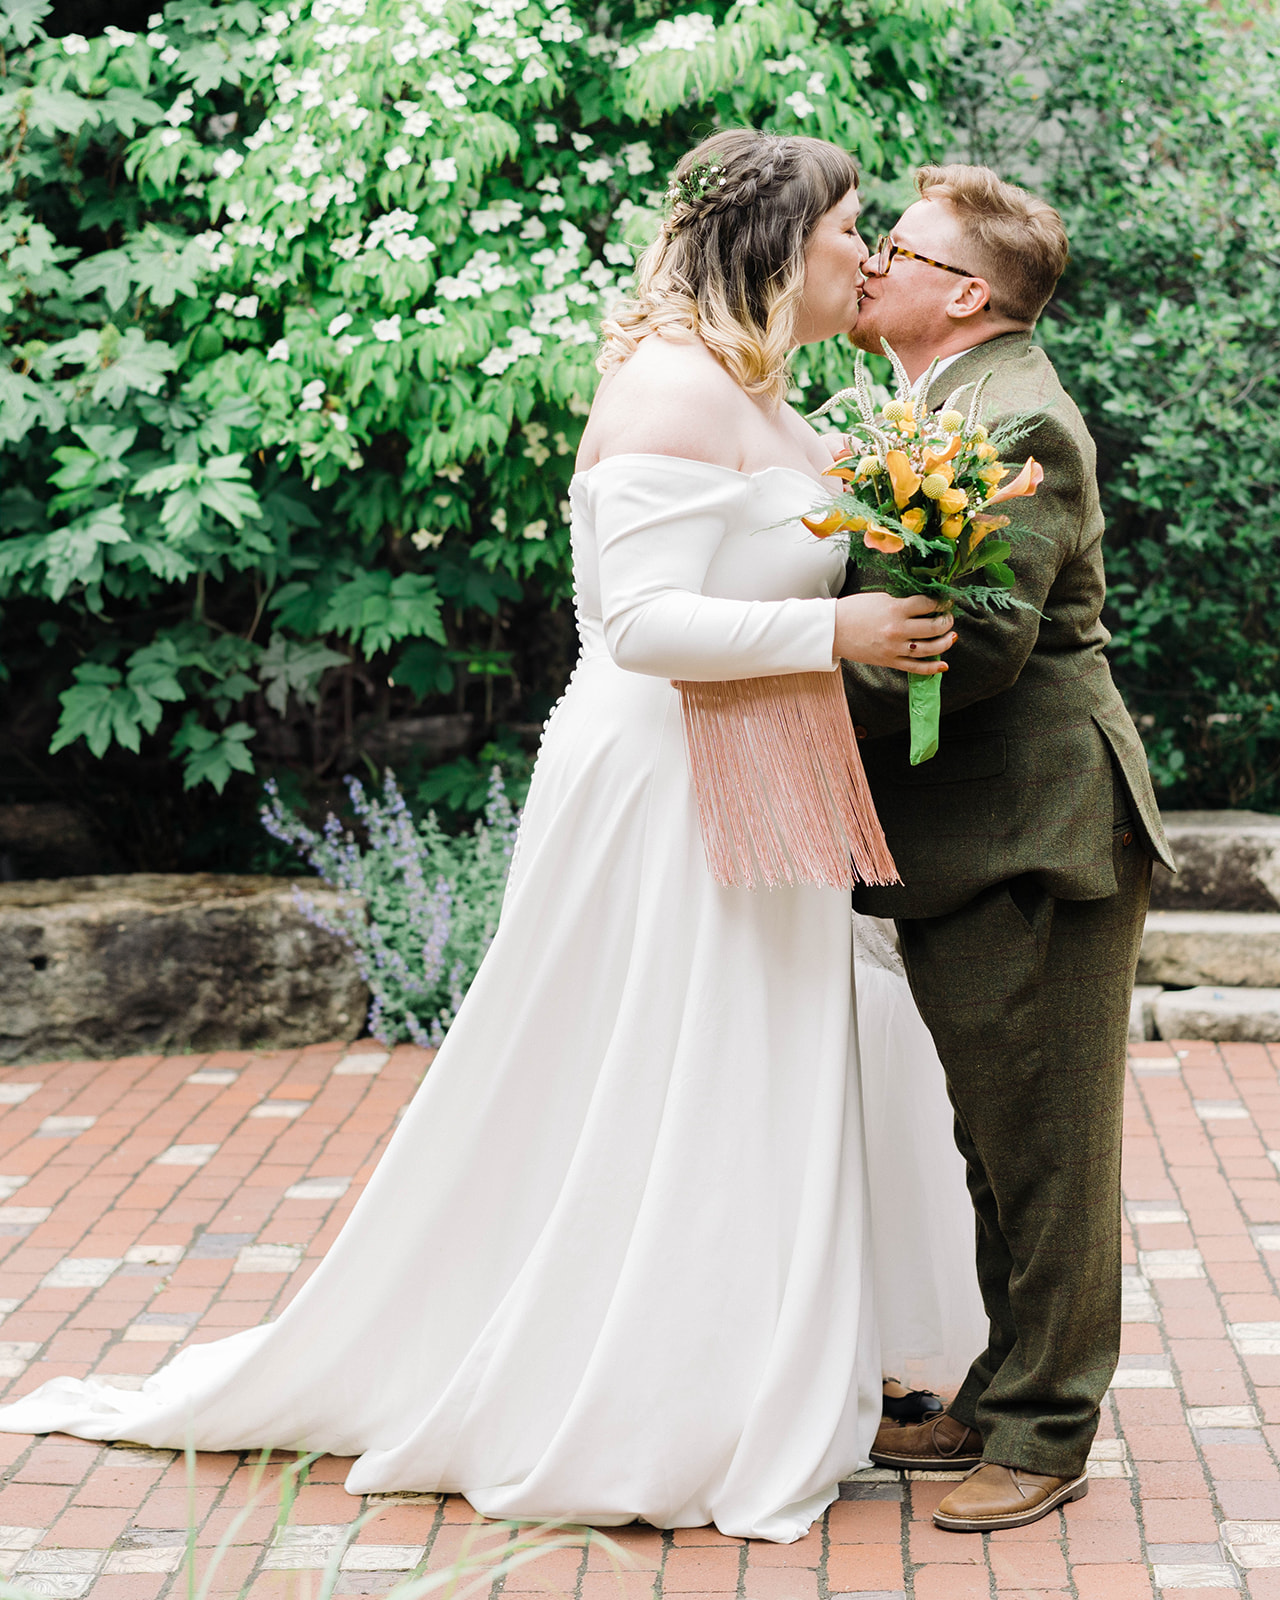 Discover the beauty of an intimate, non-traditional wedding at Mattress Factory in Pittsburgh, PA, Marien J Malloy